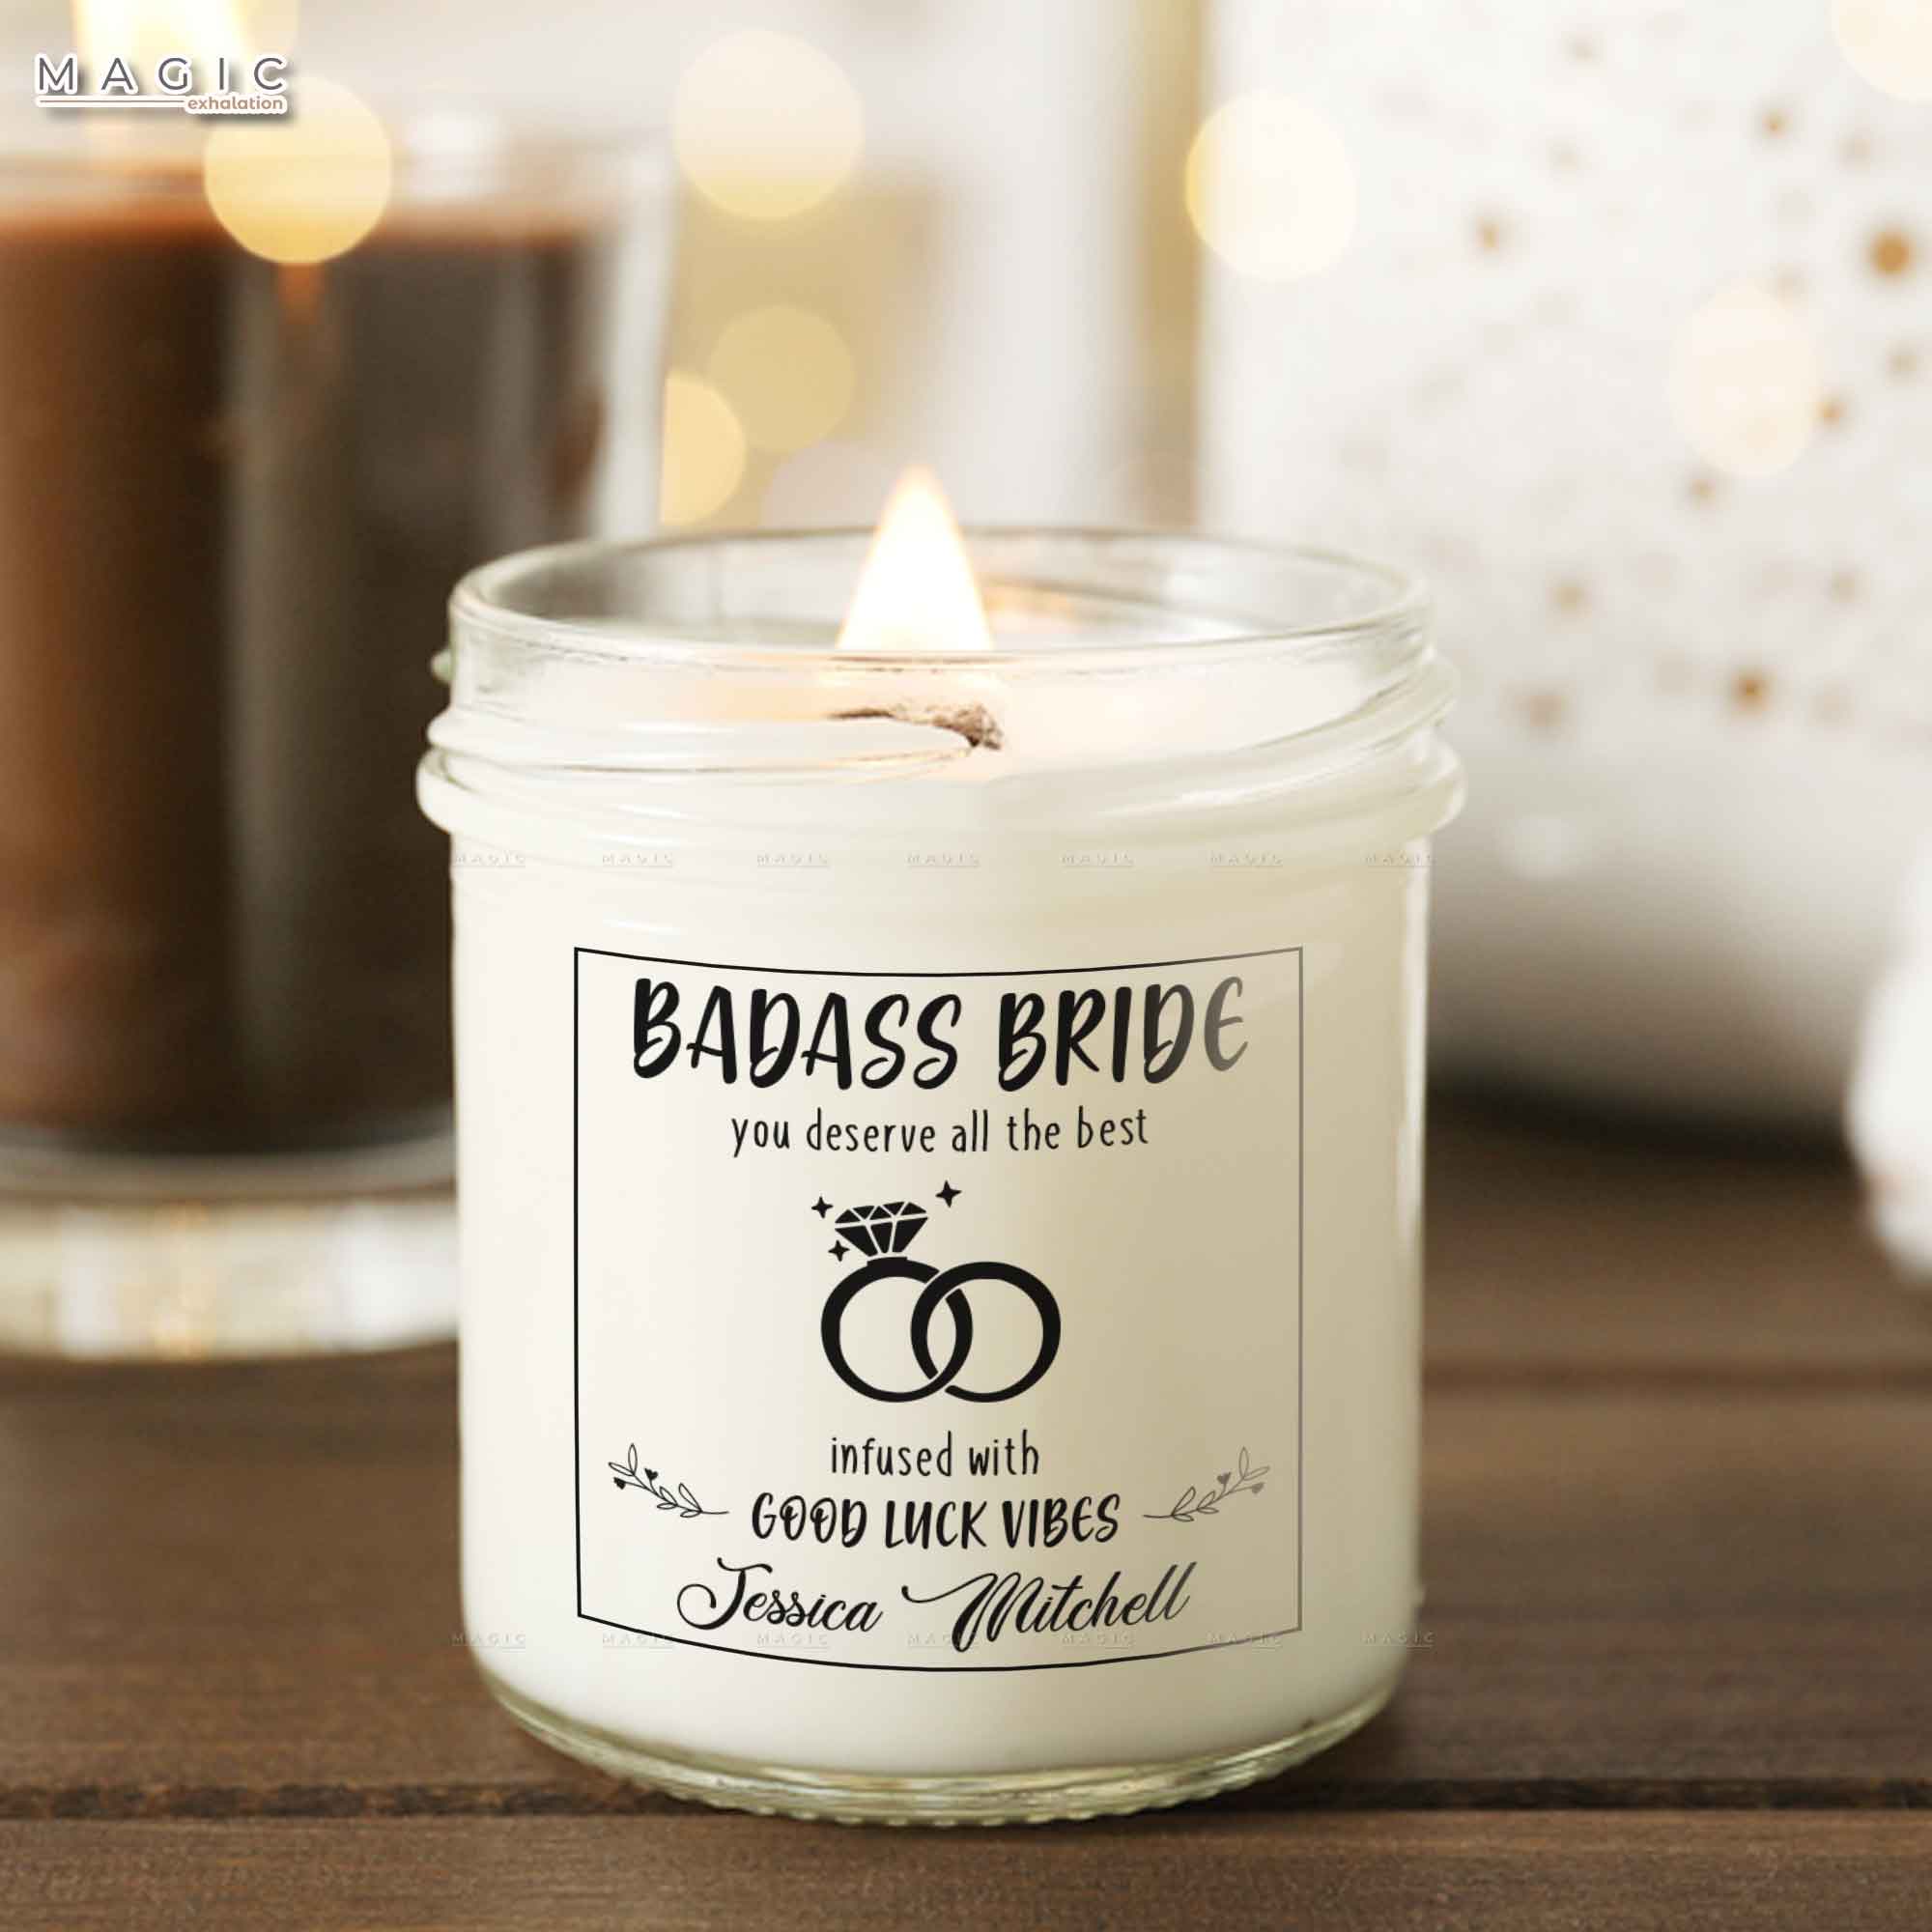 Badass Bride Candle Bridal Shower Gift, Personalized Wedding Candles Gifts From Bridesmaids, Funny Candle Wedding Gift, Bride To Be Newlywed Gift